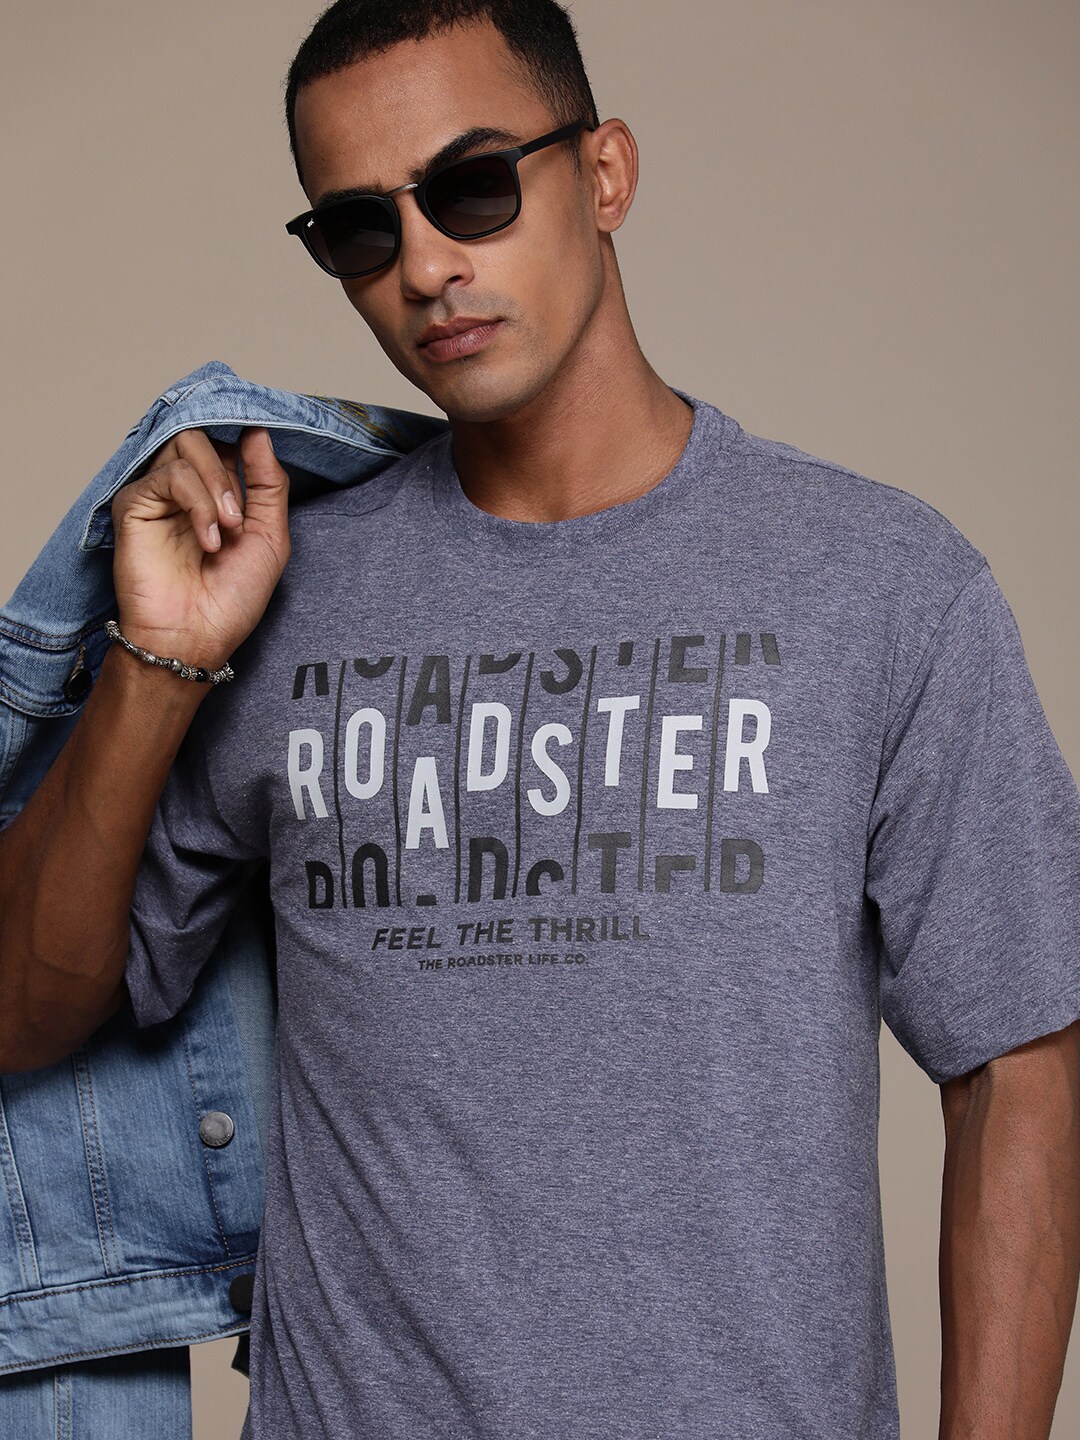 80% Off On Roadster Men Clothing Shirts